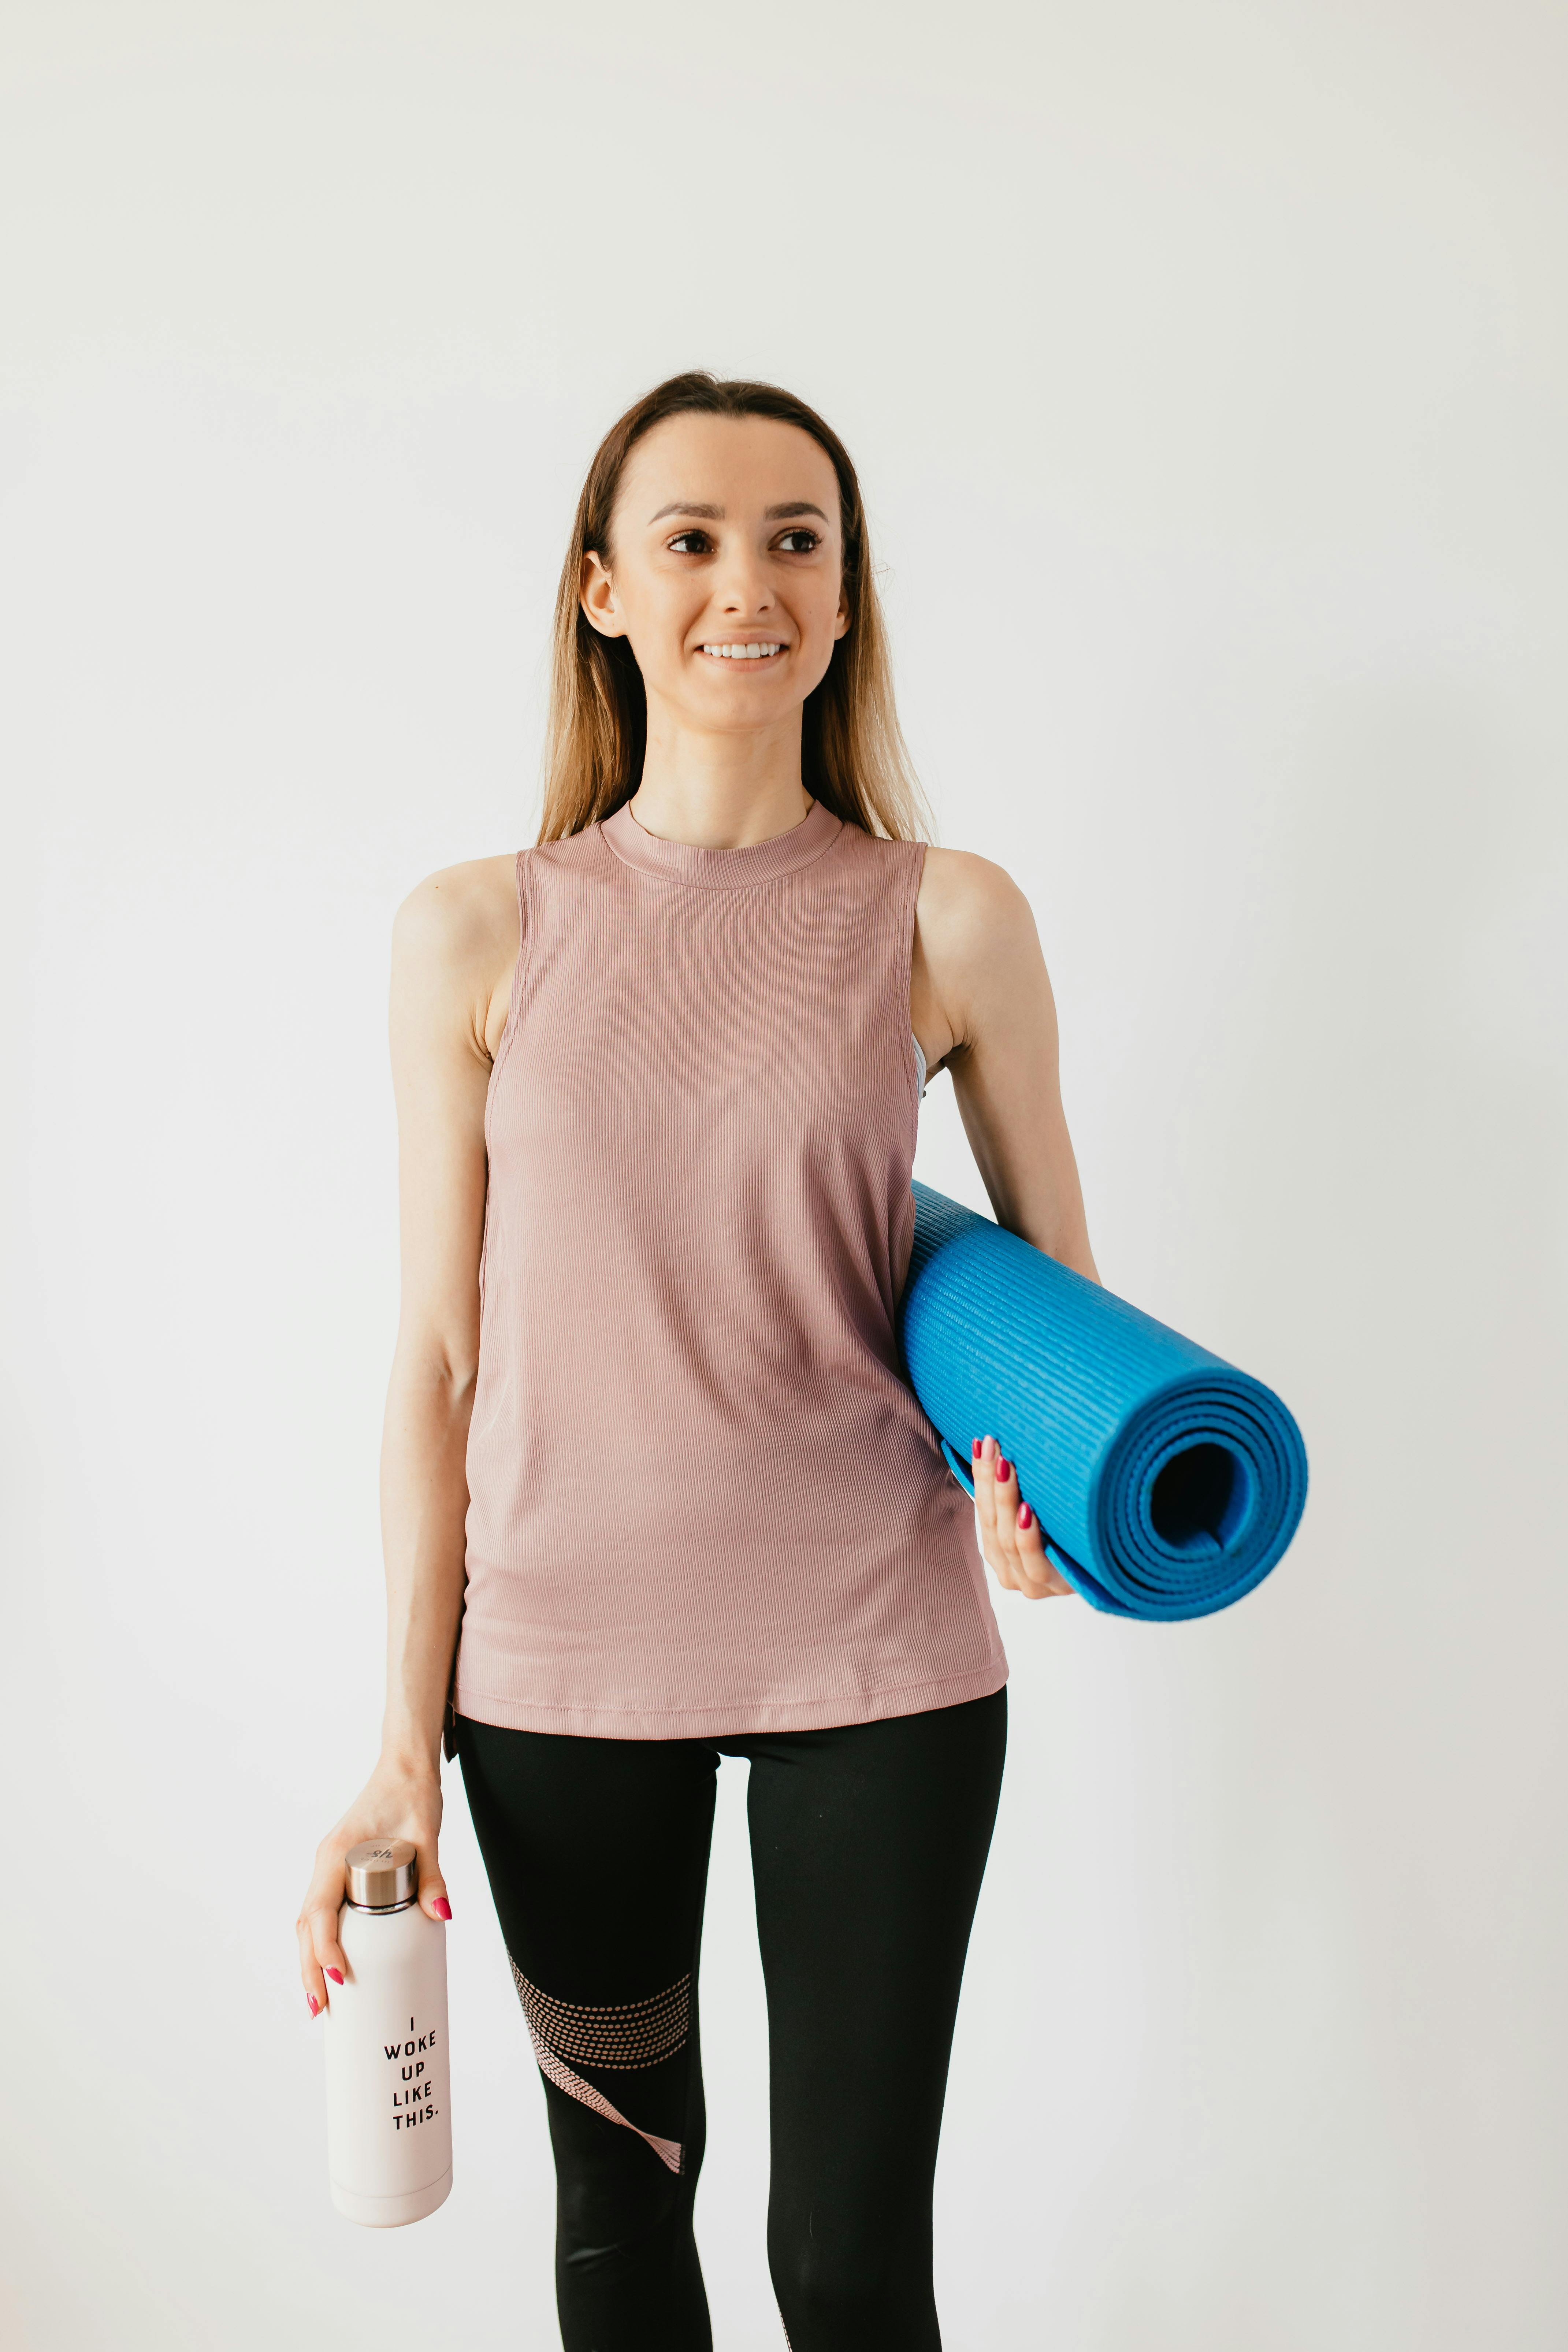 slim sportswoman carrying sport mat and water bottle before indoors workout